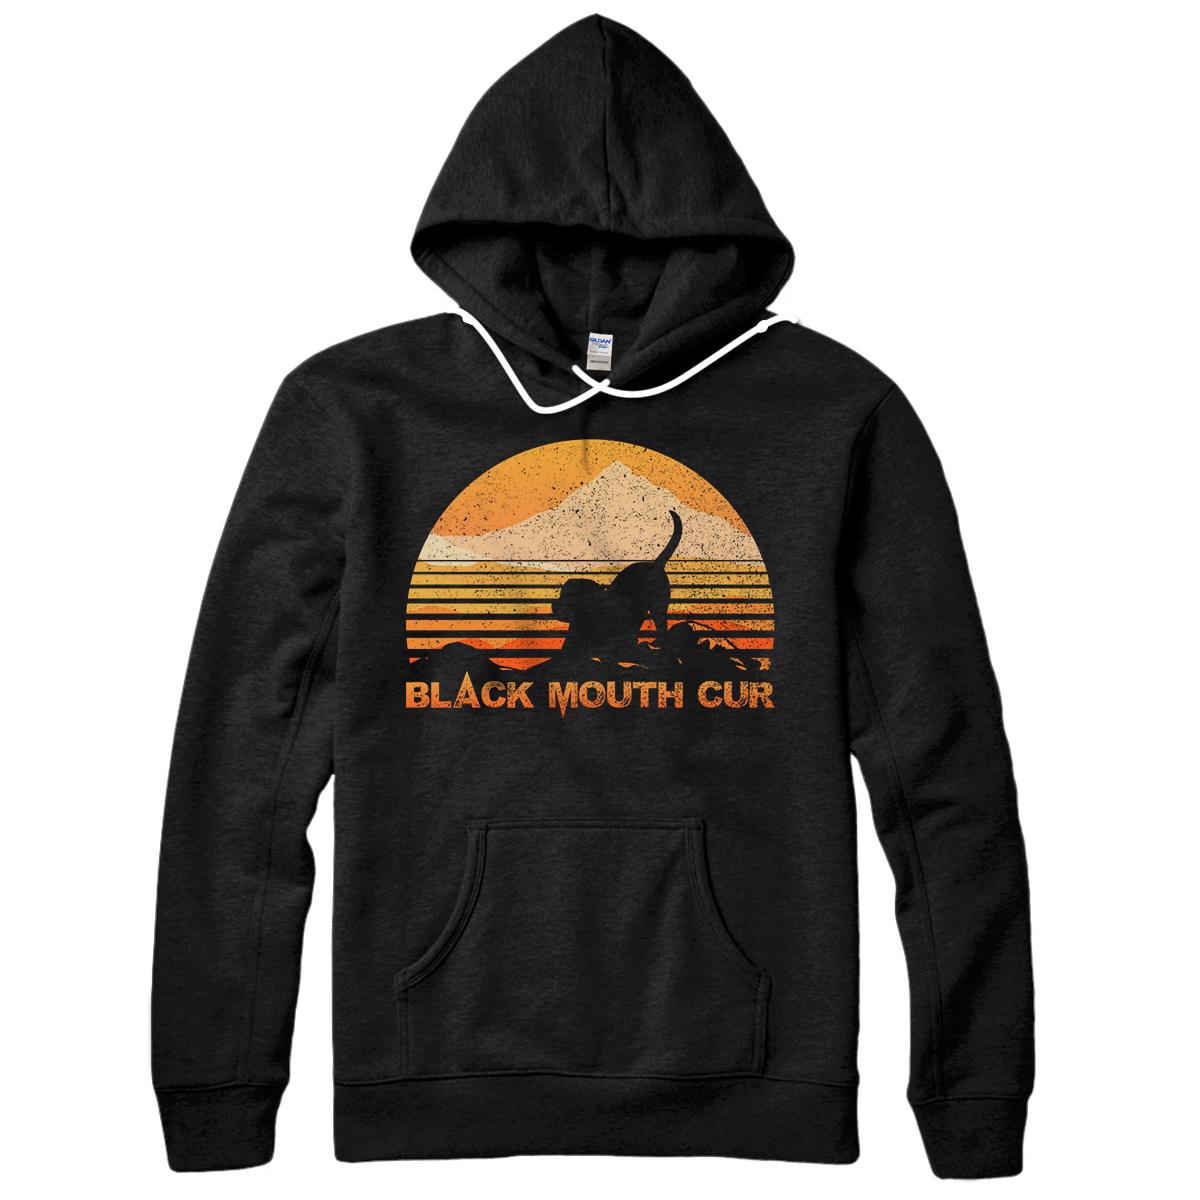 Personalized BLACK MOUTH CUR Funny Hoodie, Vintage Retro Pullover Hoodie